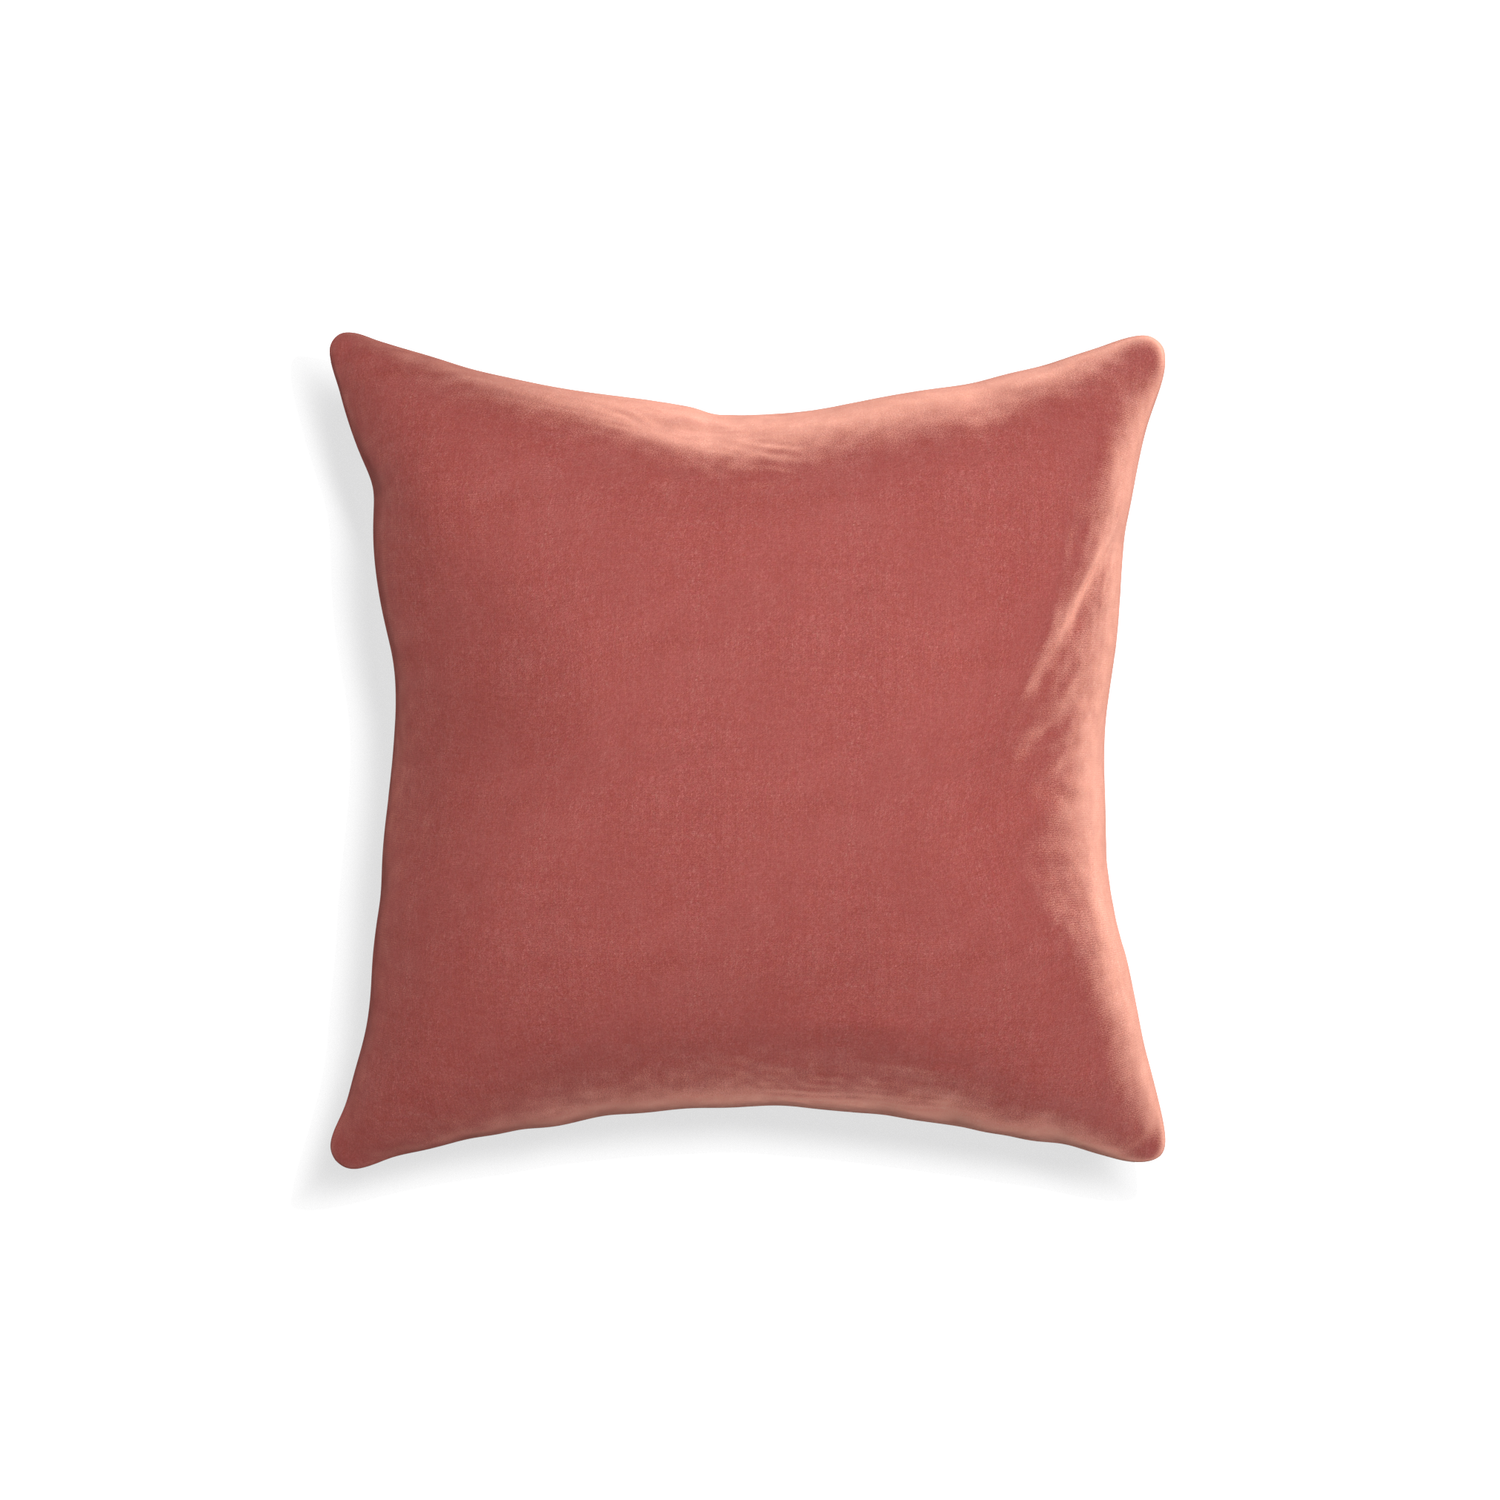 18-square cosmo velvet custom pillow with none on white background